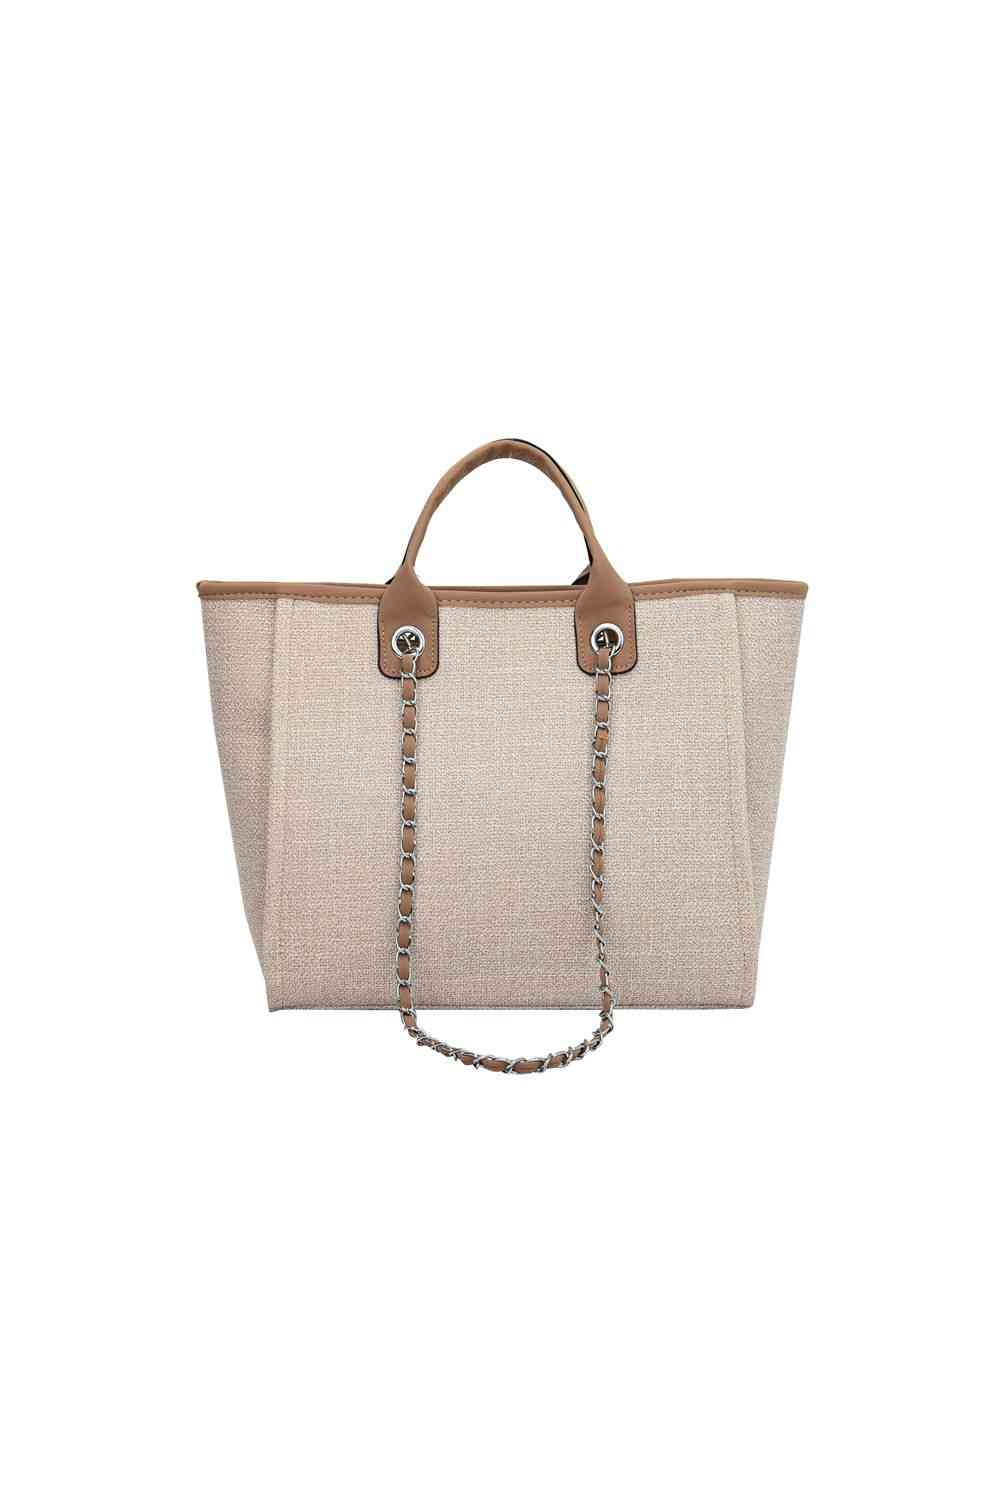 Adored Polyester Tote Bag Tan One Size